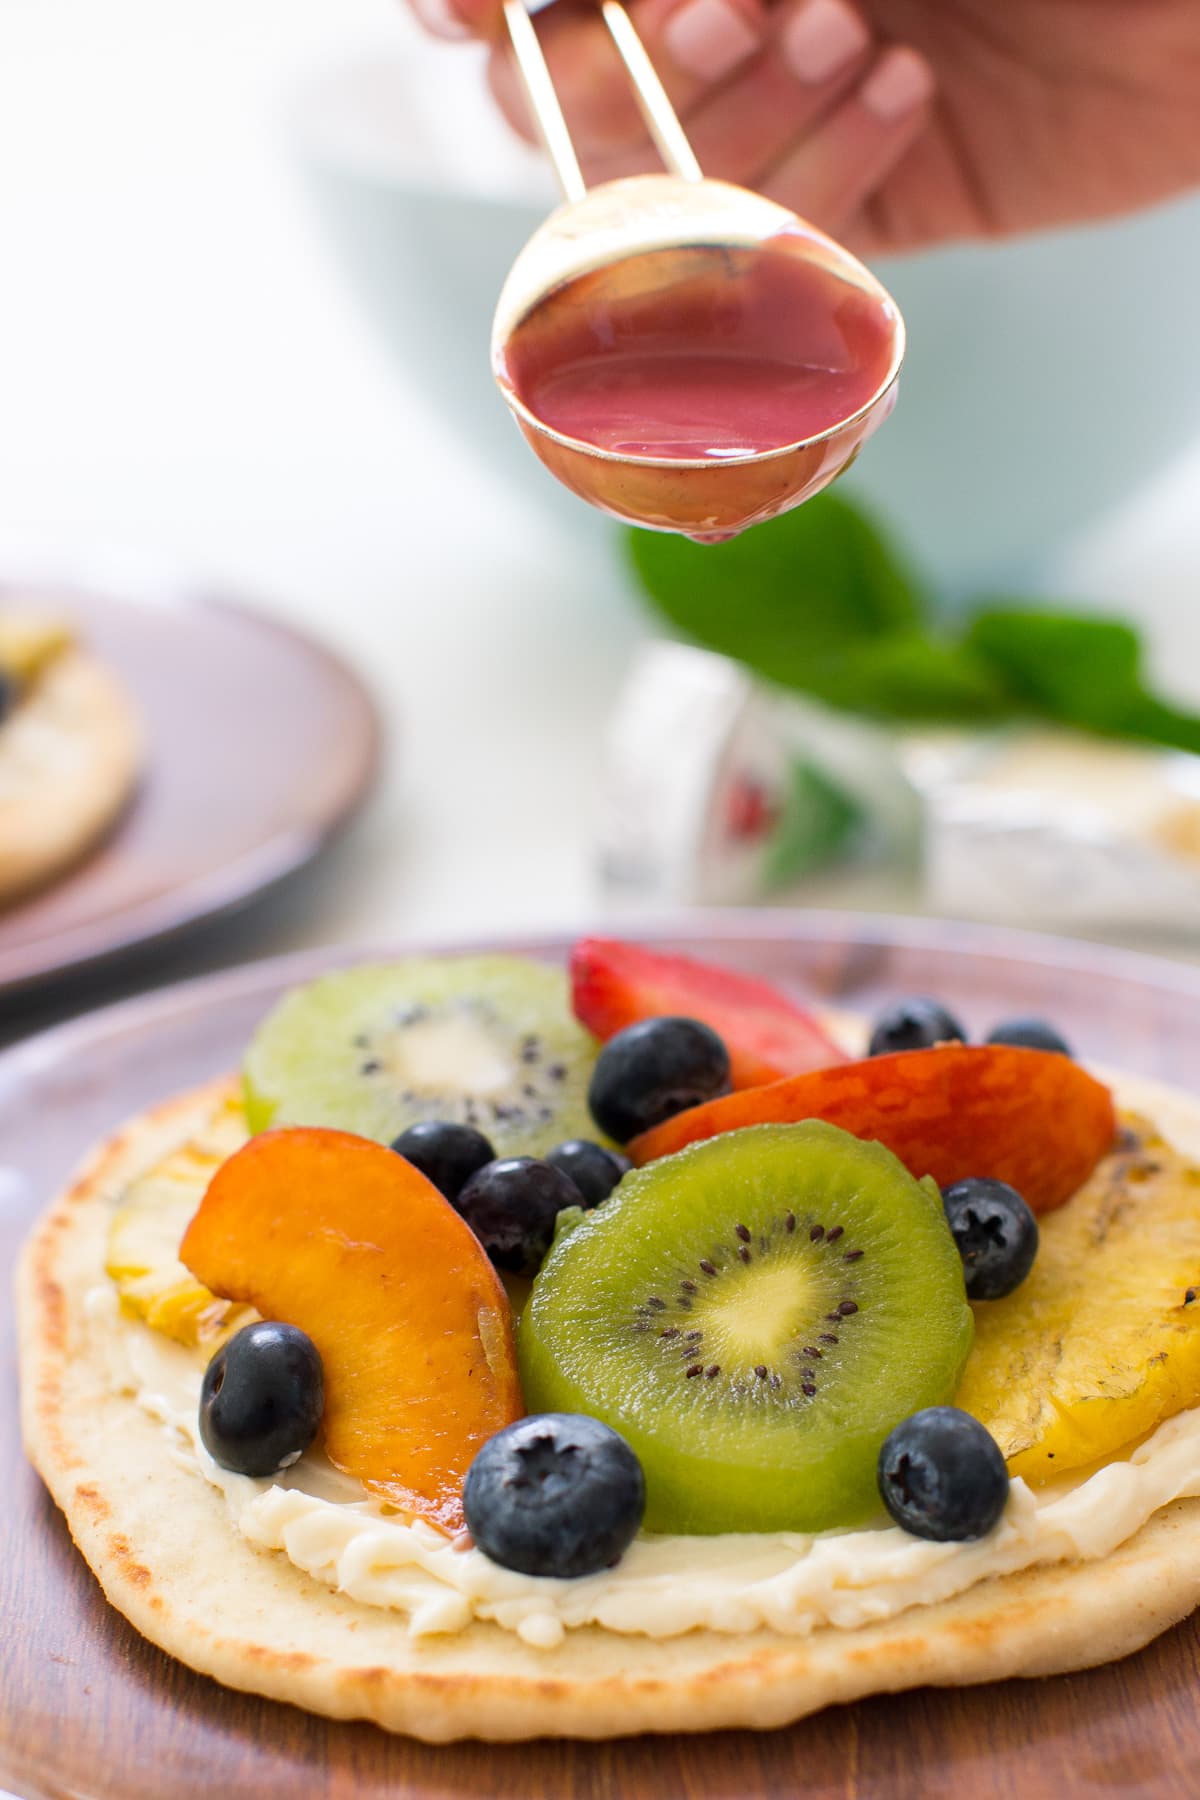 A Summer Grilled Fruit Pizza Recipe by top Houston lifestyle blogger Ashley Rose of Sugar & Cloth